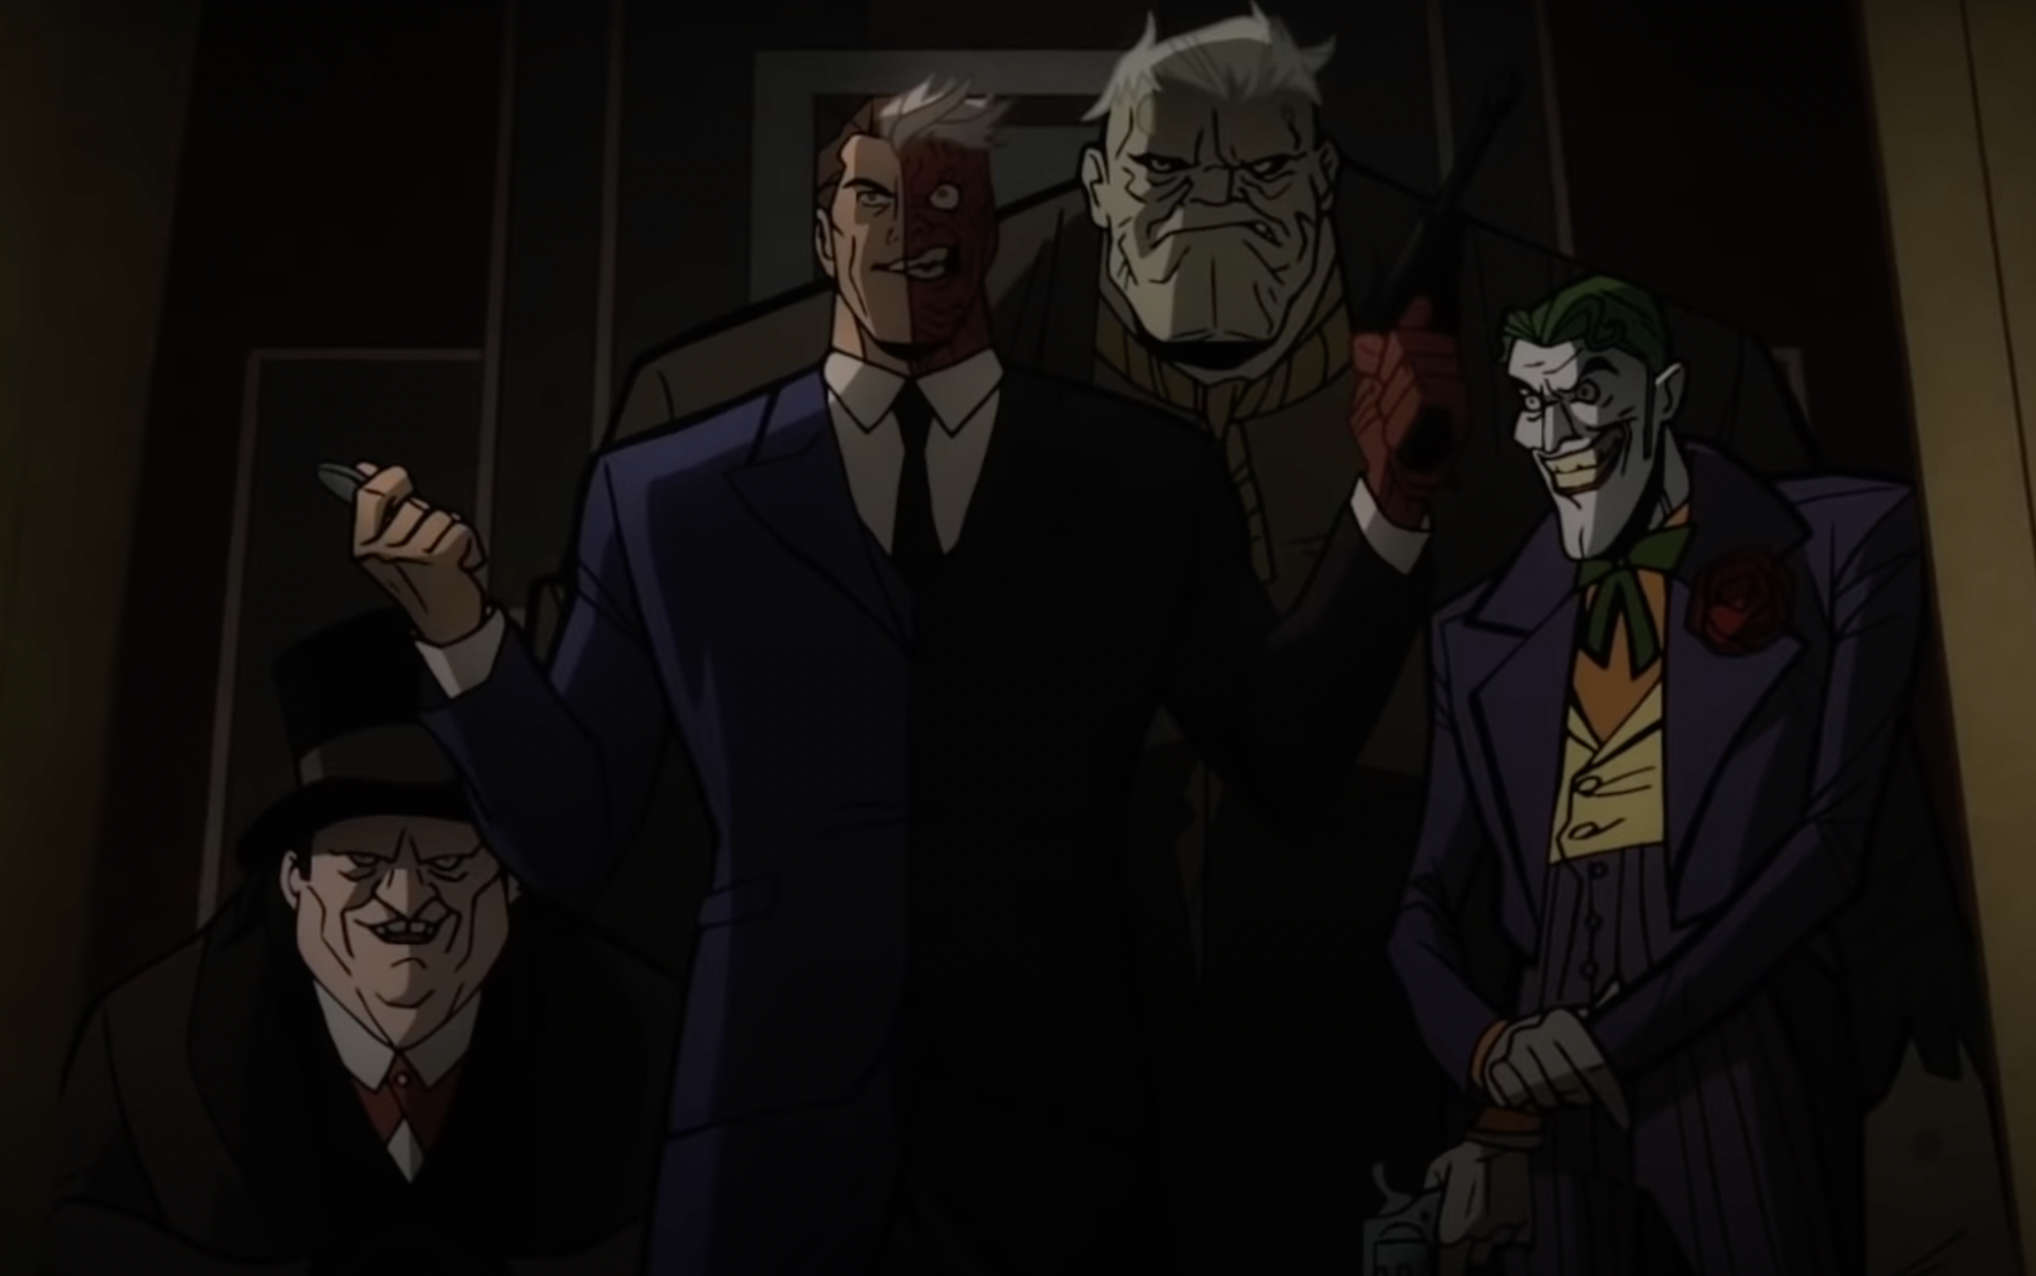 New clip from DCs Injustice animated movie featuring Batman Joker and  Superman